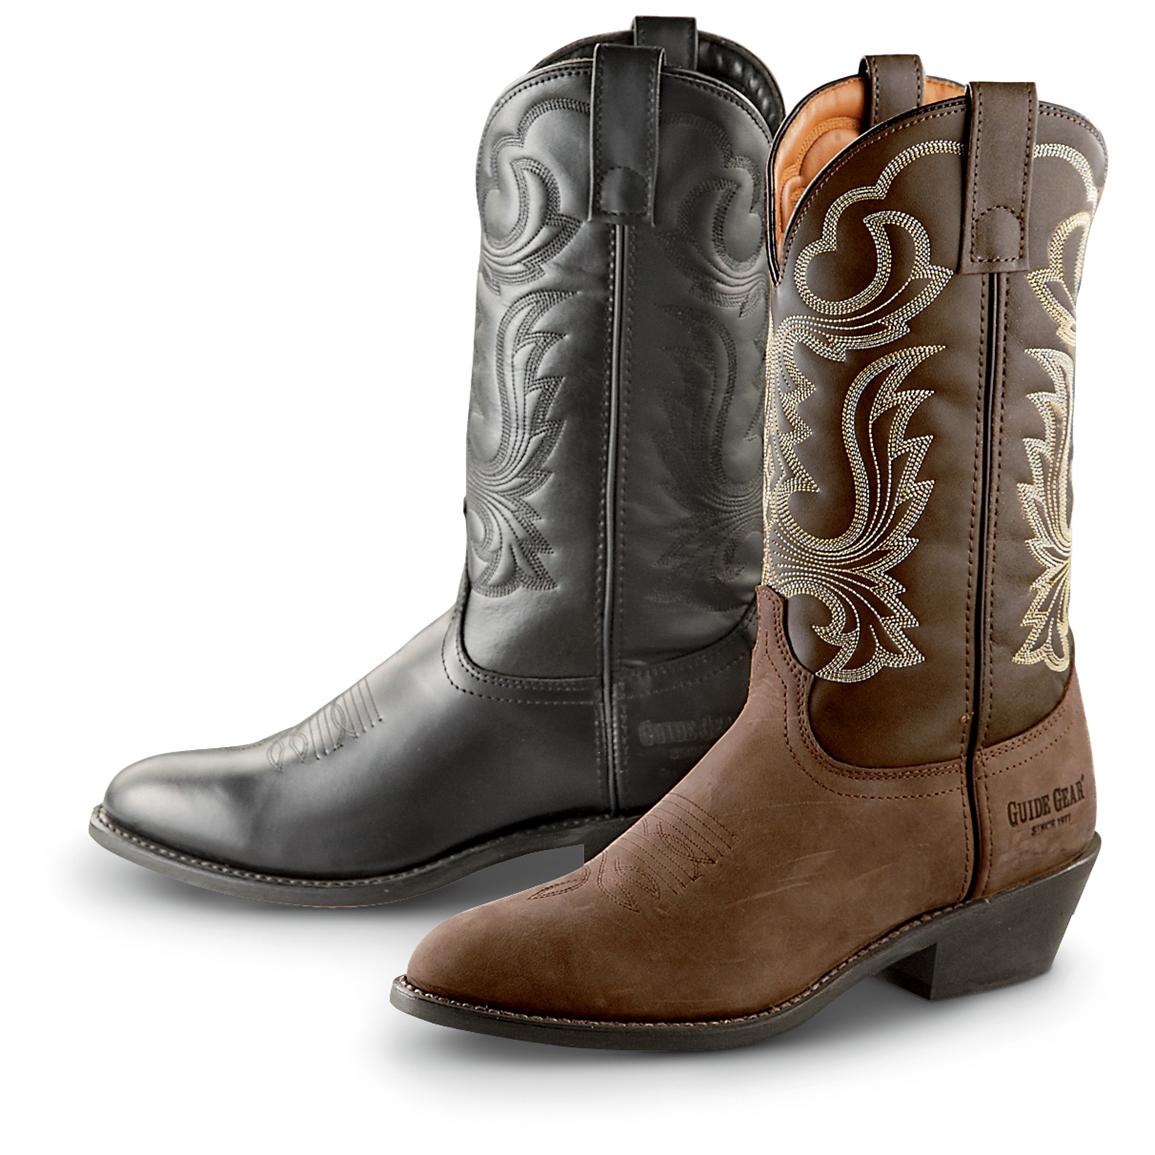 Western Cowboy Boots For Sale - Yu Boots